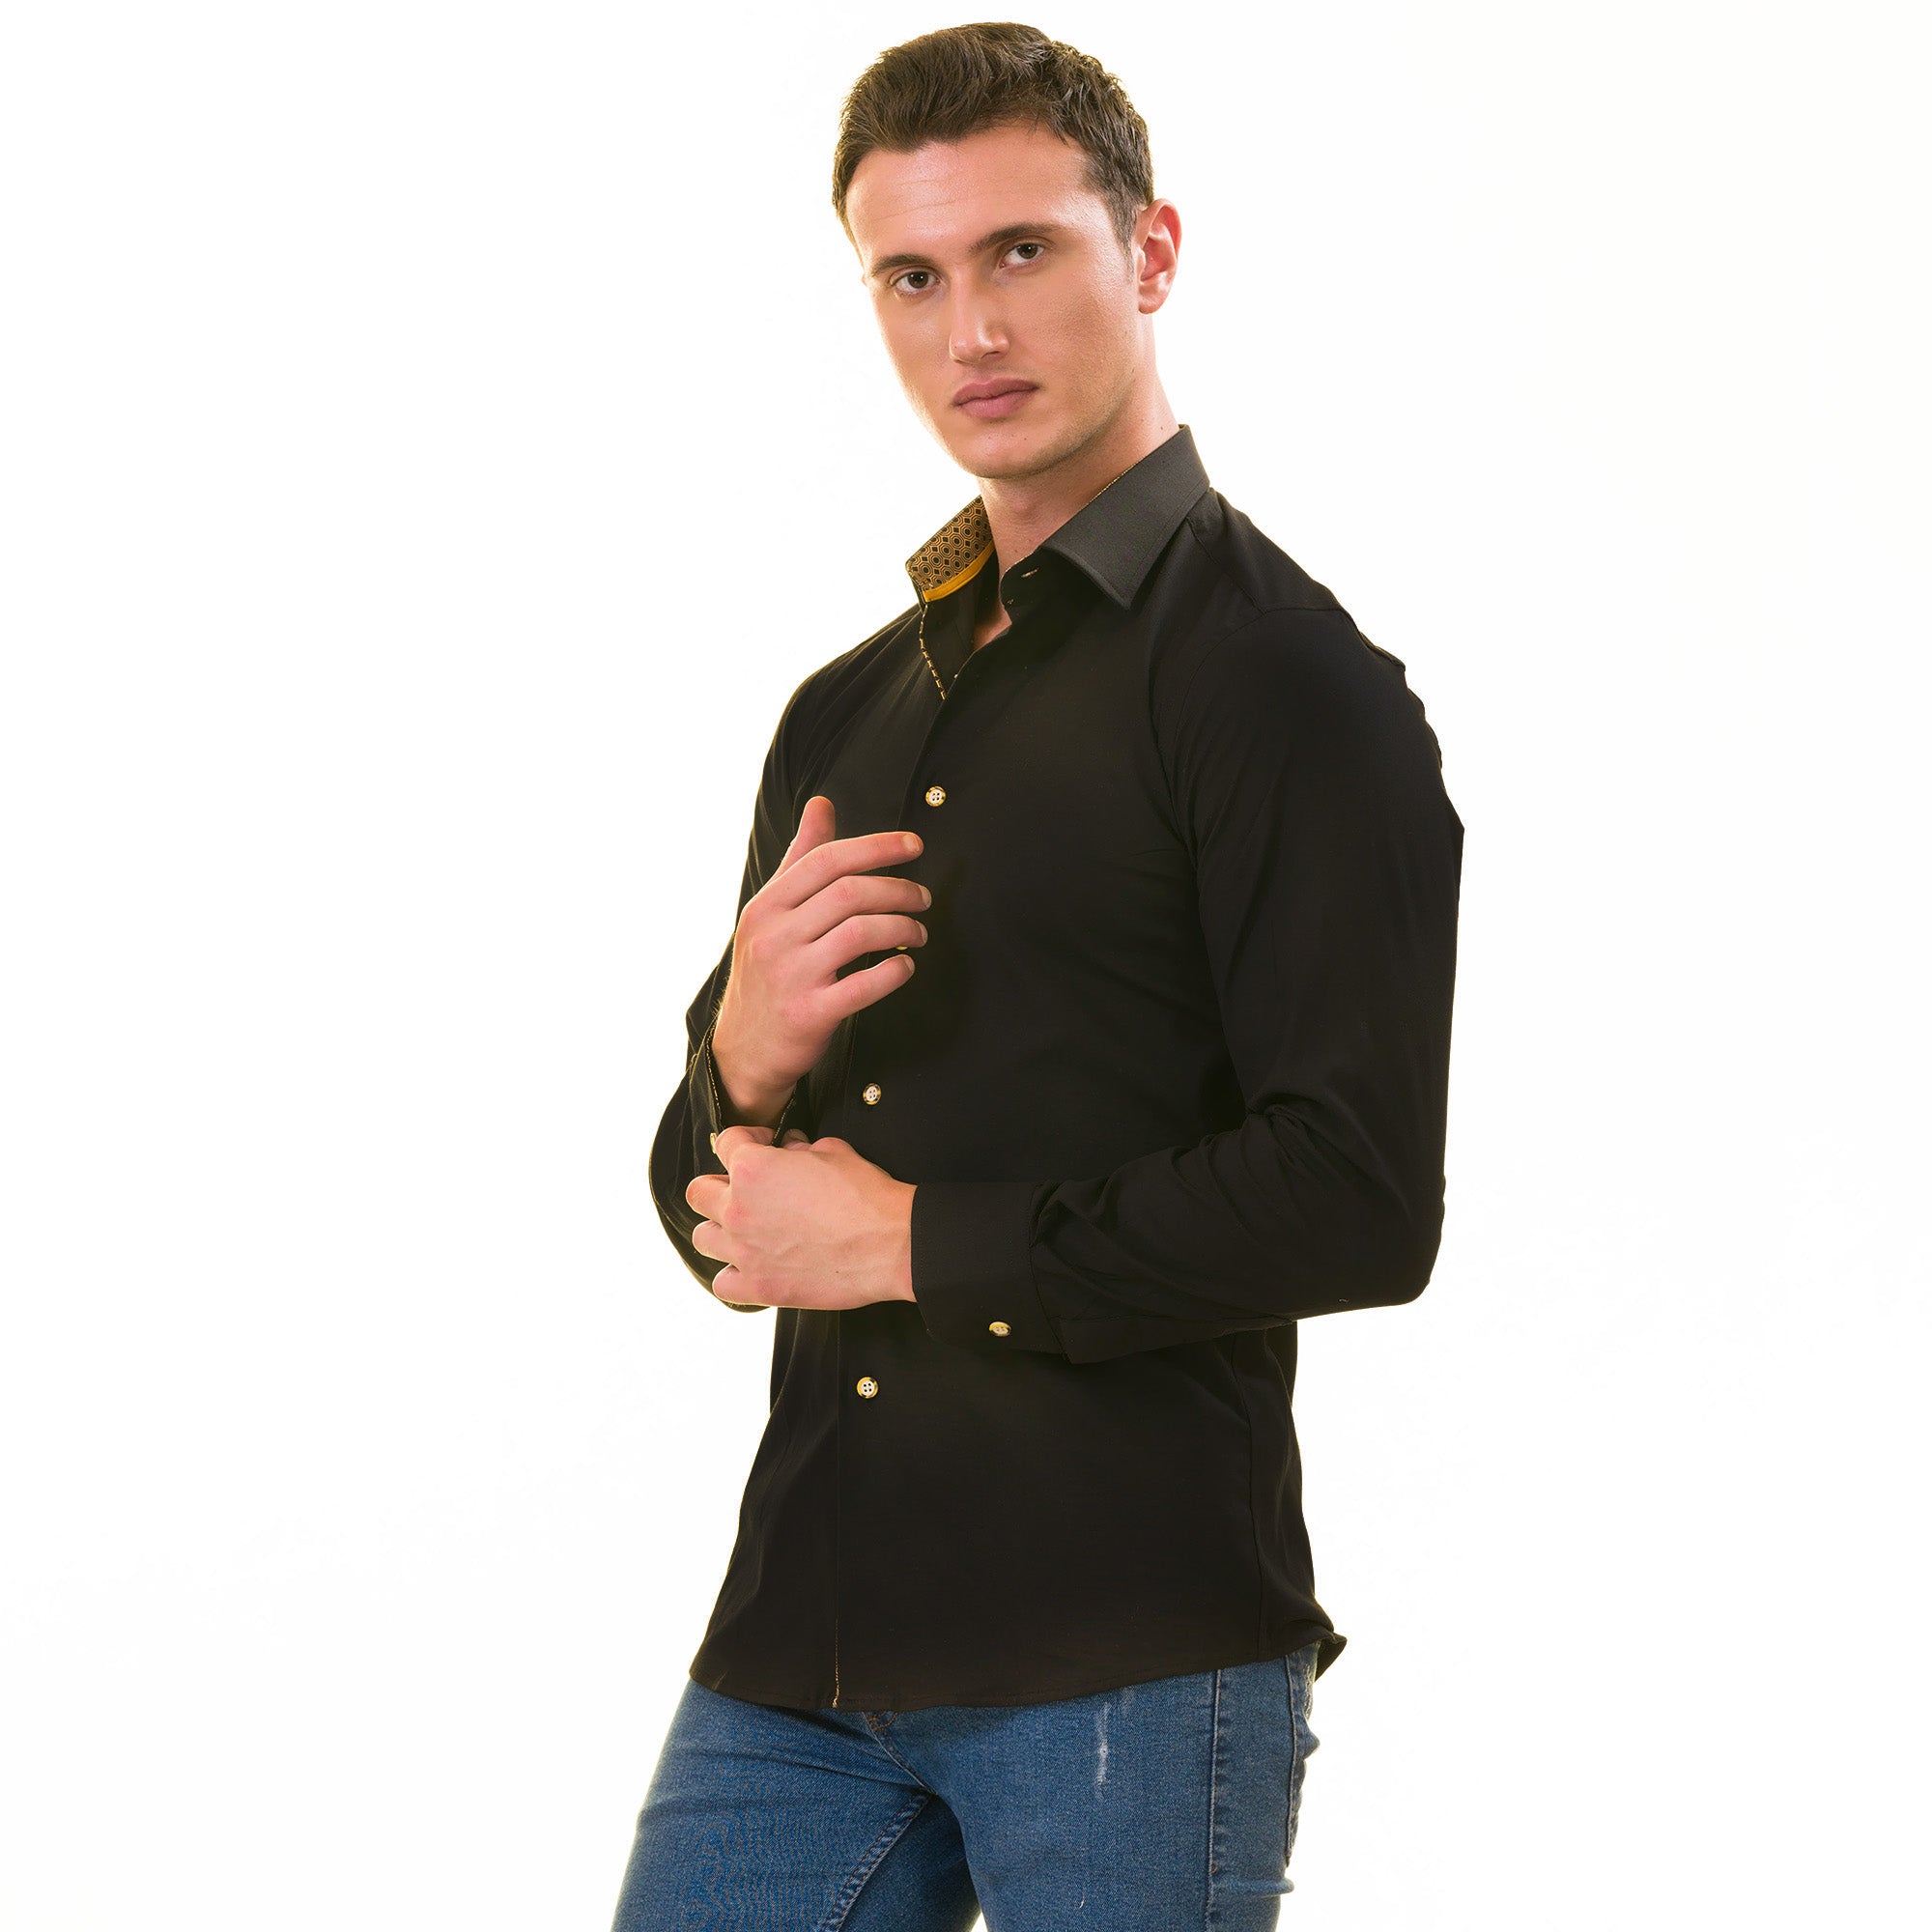 Black with inside Gold Men's Slim Fit Designer Shirt - Tailored Cotton Shirts for Work and Casual Wear